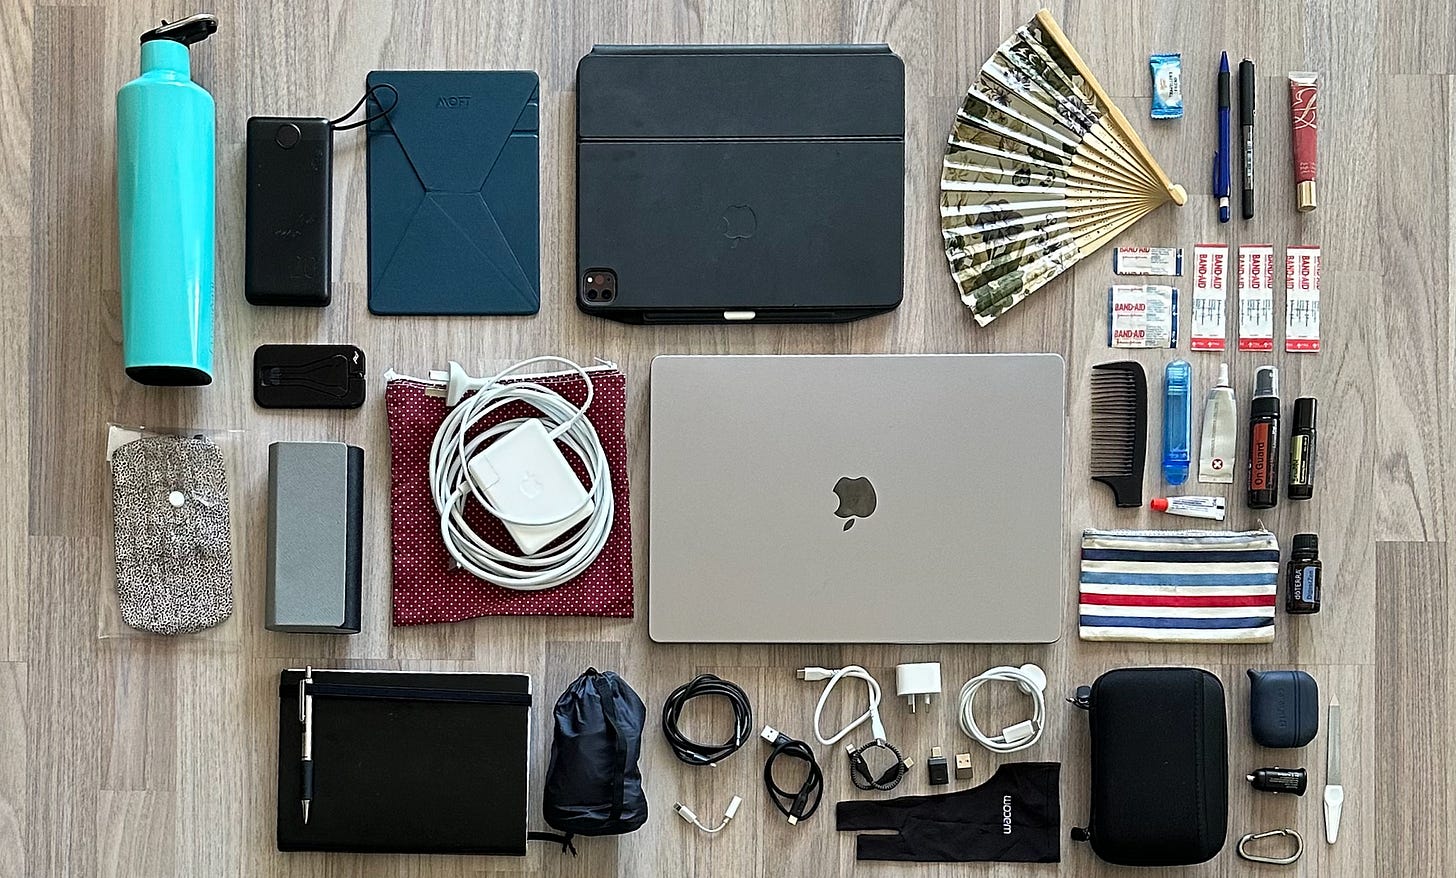 Subset of items from the first photo of the article, including the aqua drink bottle, iPad Pro, MacBook pro, notebook, and cables. Full list of items below.